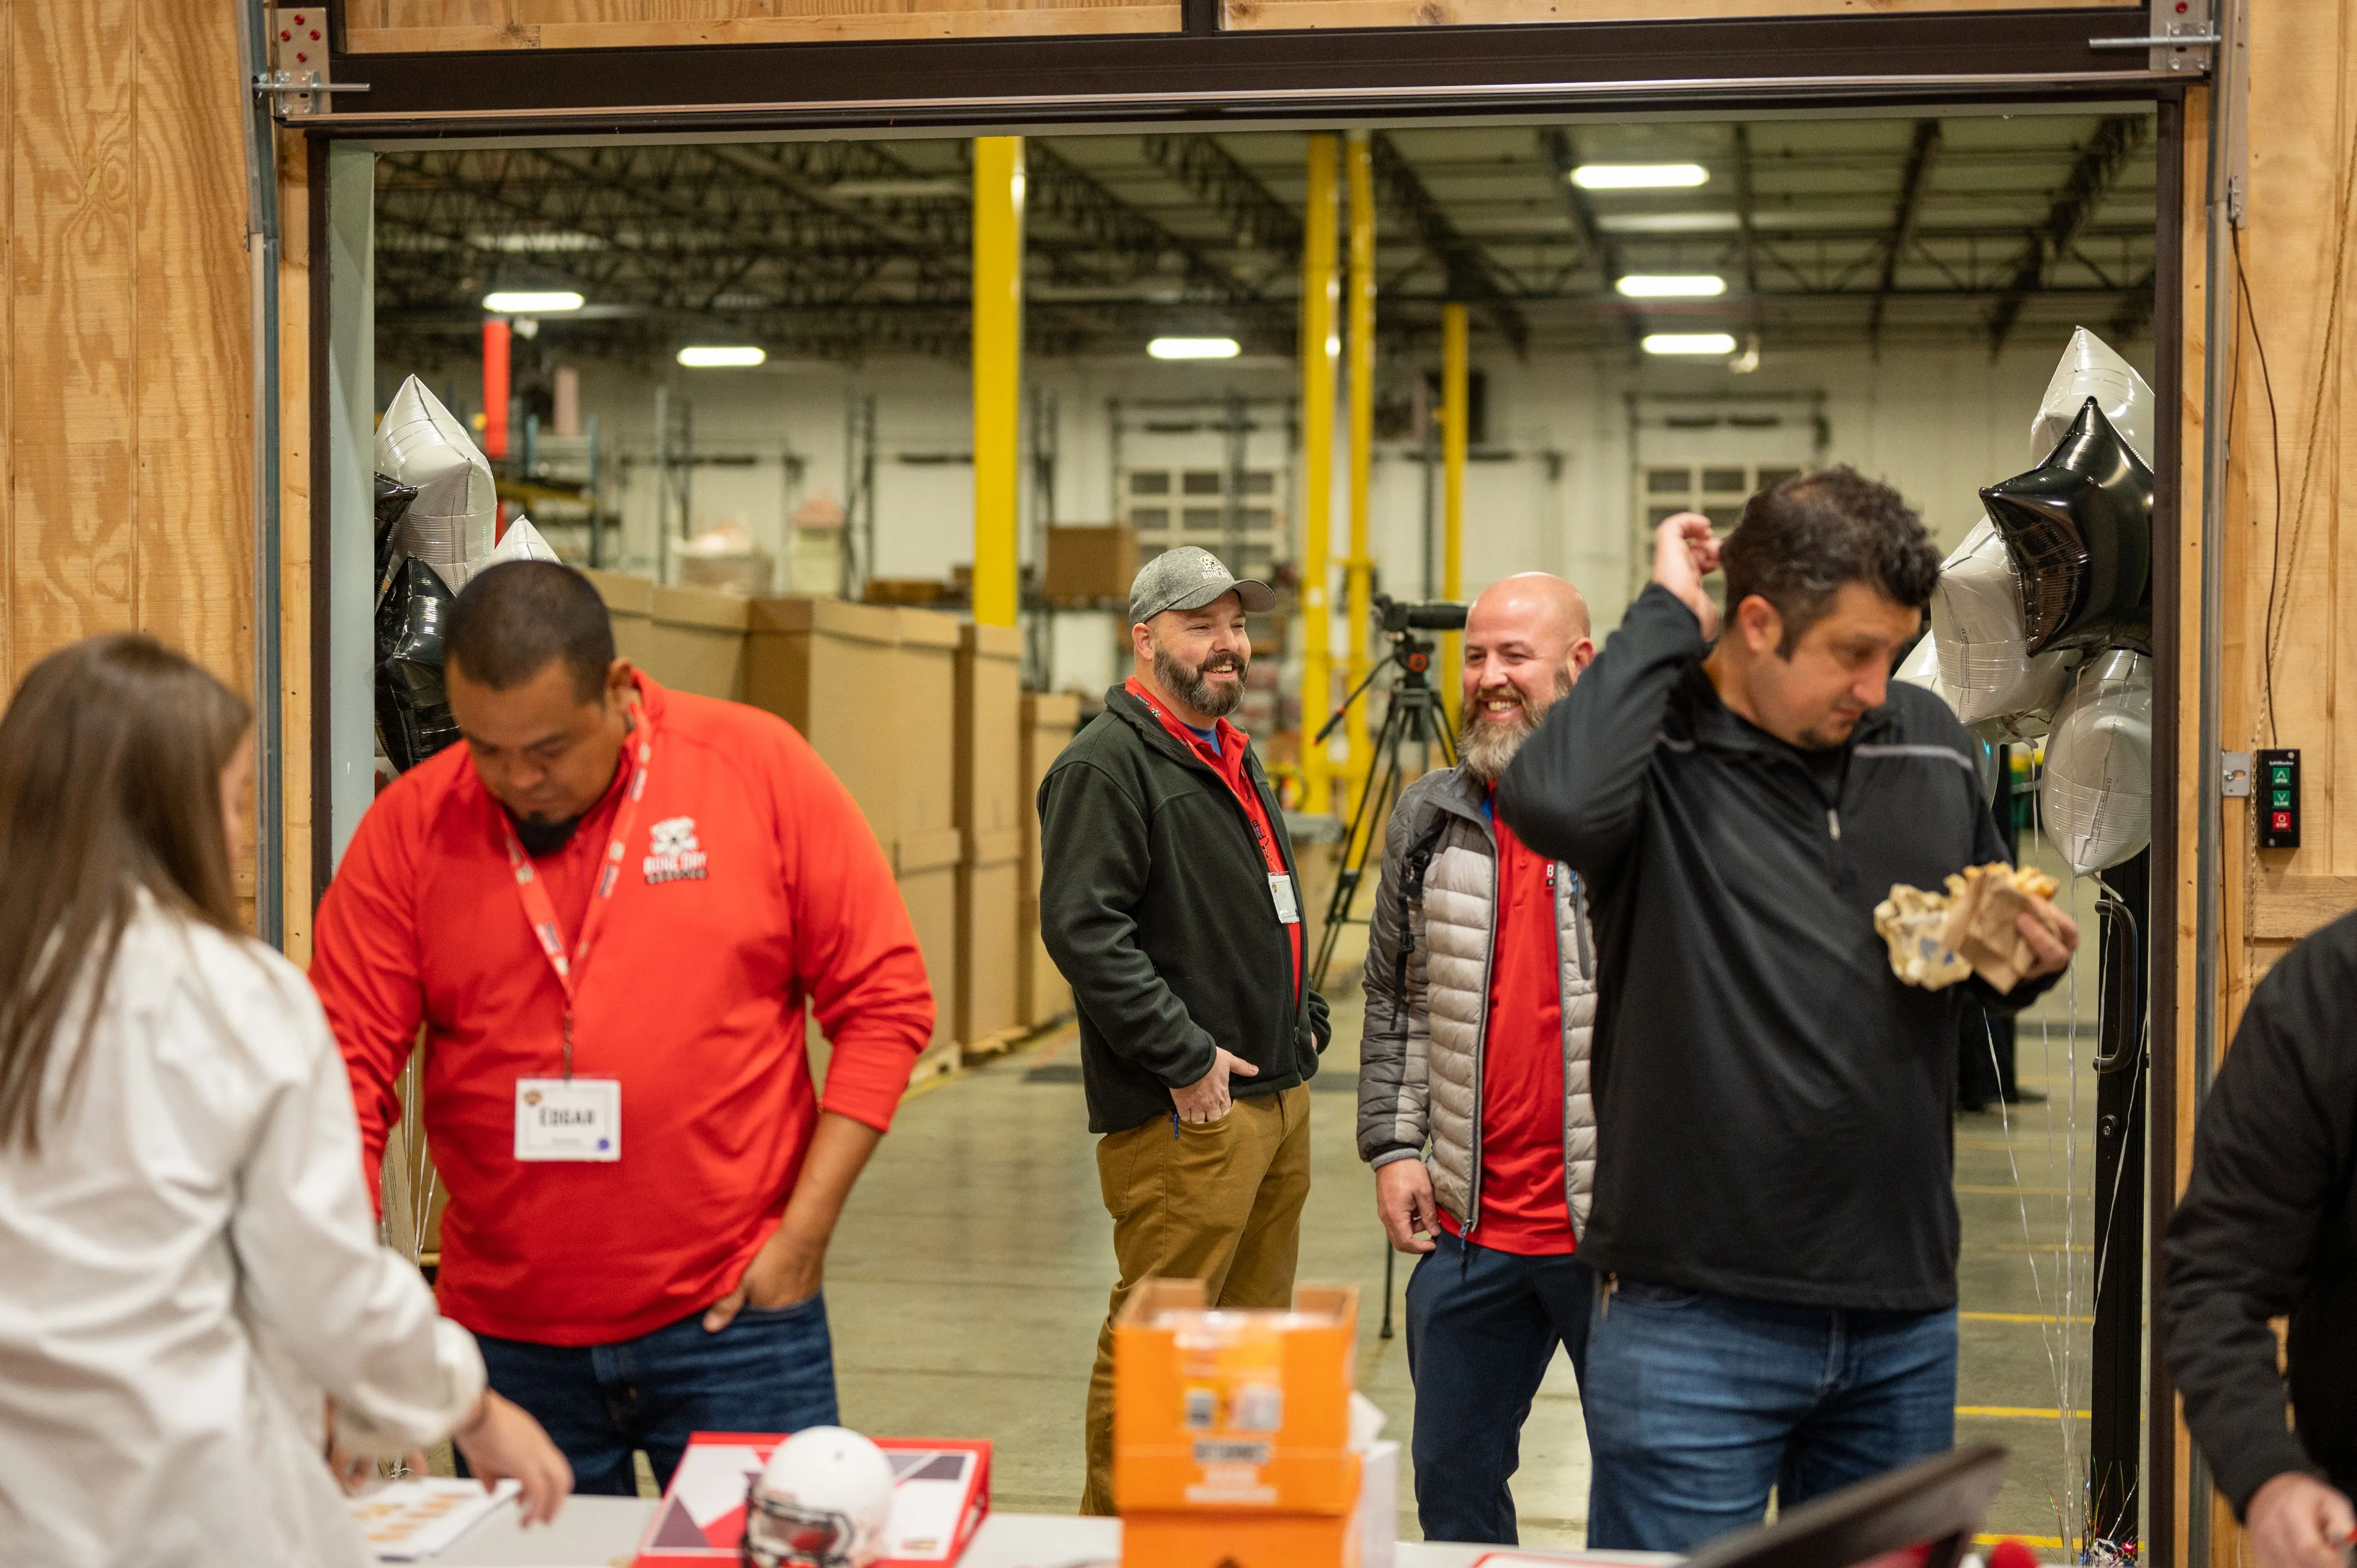 Group of people engaged in an activity in a warehouse setting, with some individuals wearing name tags and carrying items.